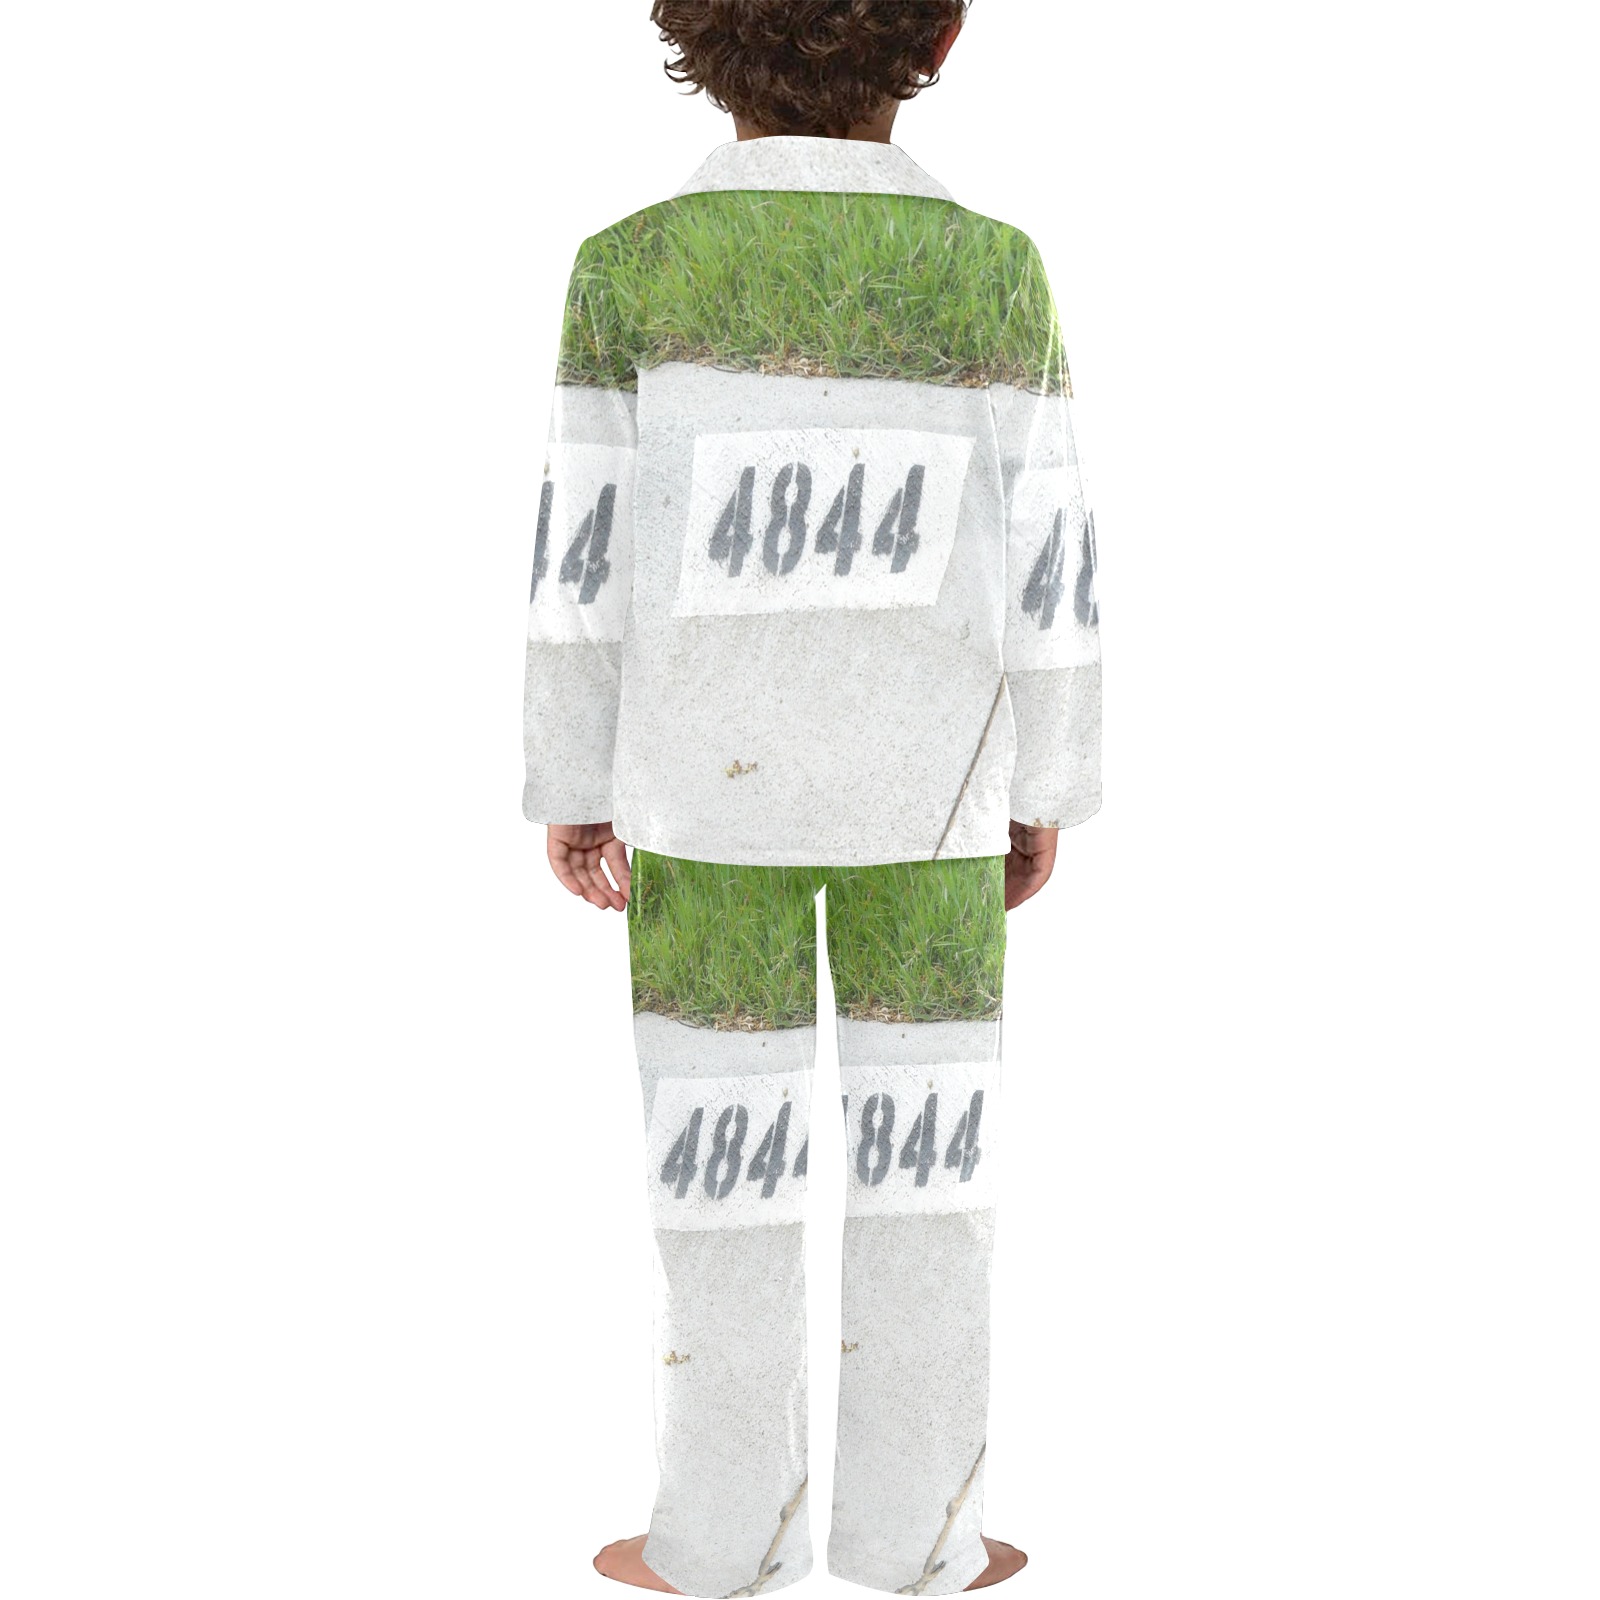 Street Number 4844 with White Button Little Boys' V-Neck Long Pajama Set (Sets 02)